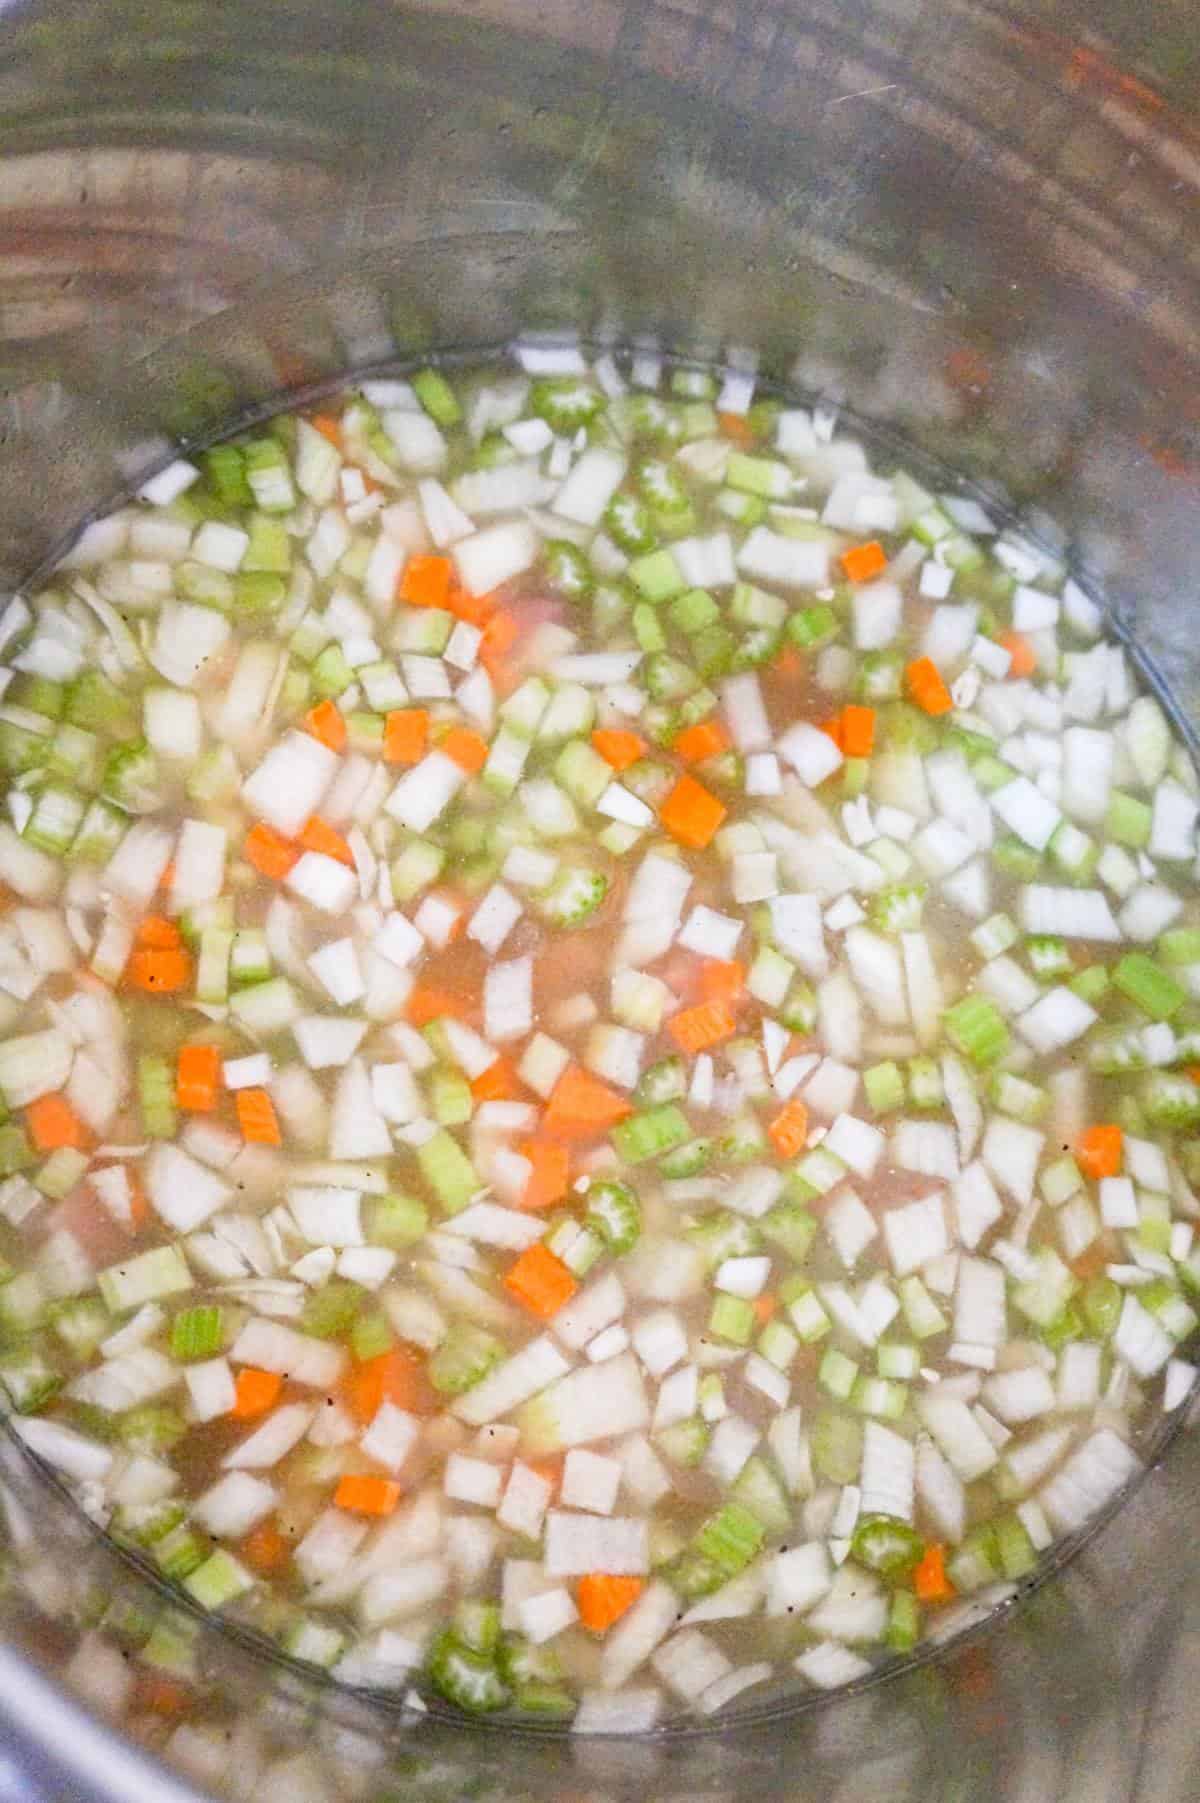 diced vegetables in broth in an Instant Pot